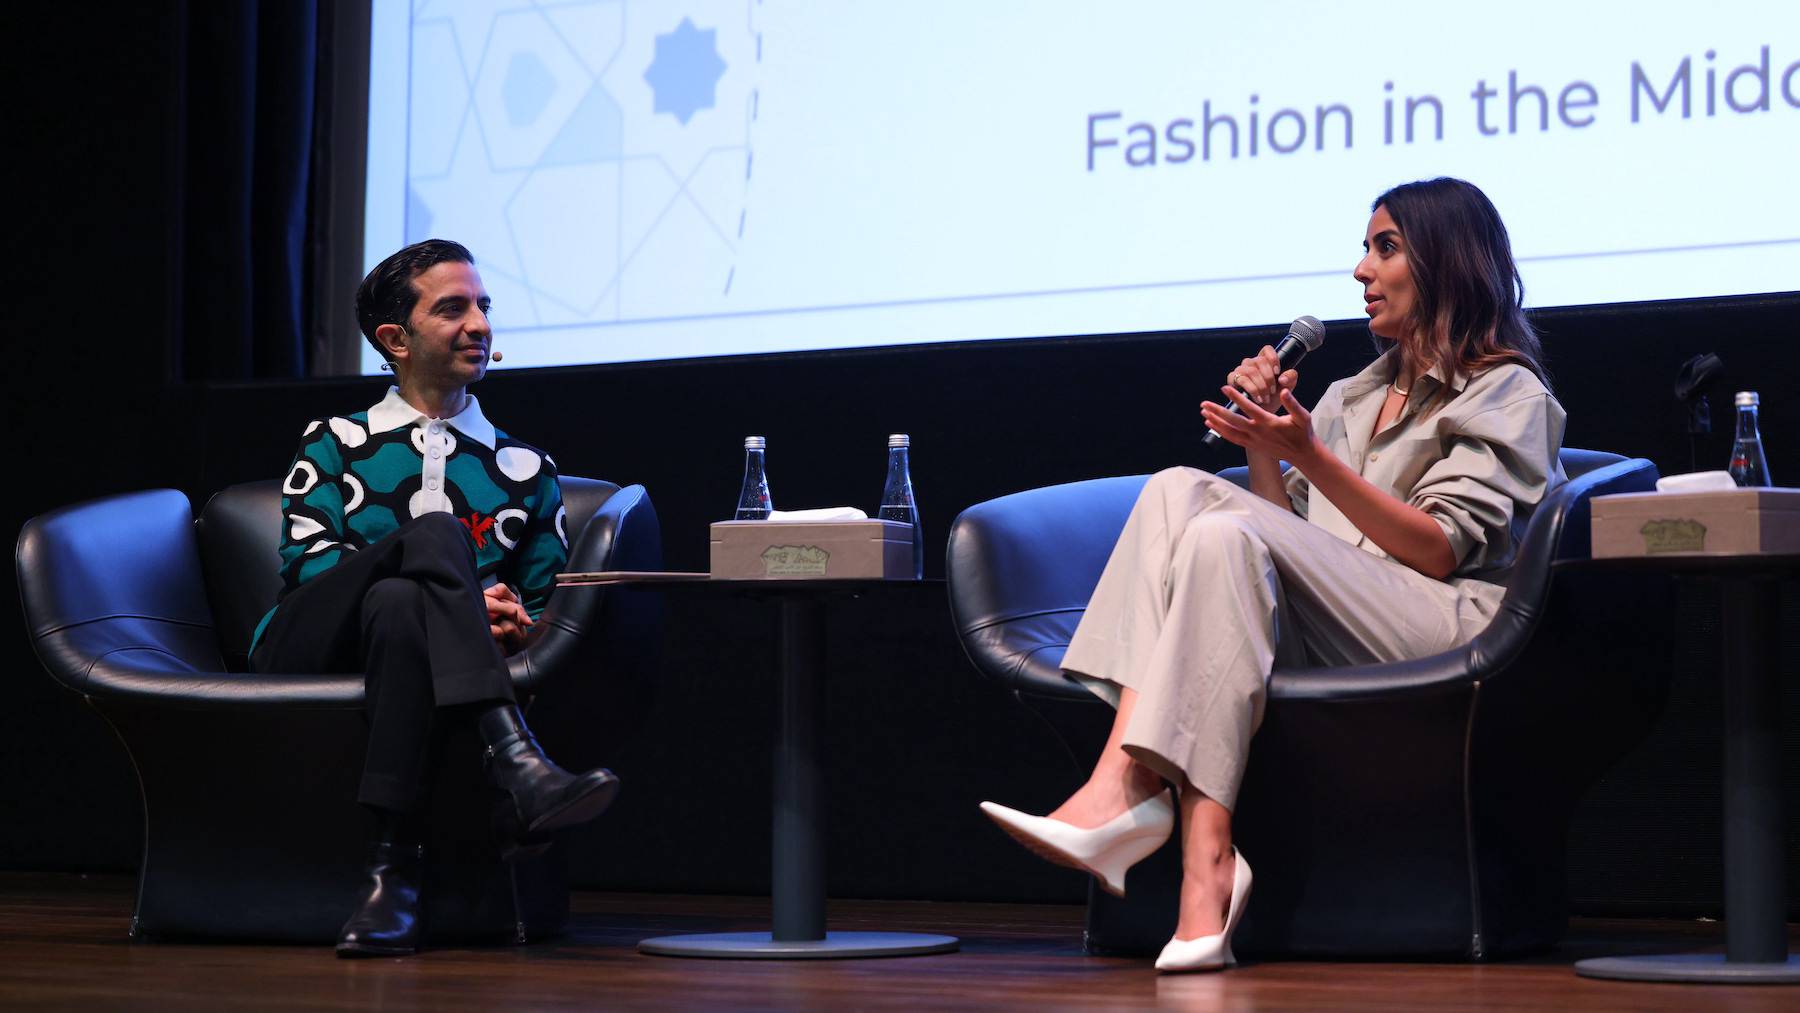 BoF's Imran Amed and Aubade Jewelry's Duha Al Ramadhan sit on stage at Oud Fashion Talks.